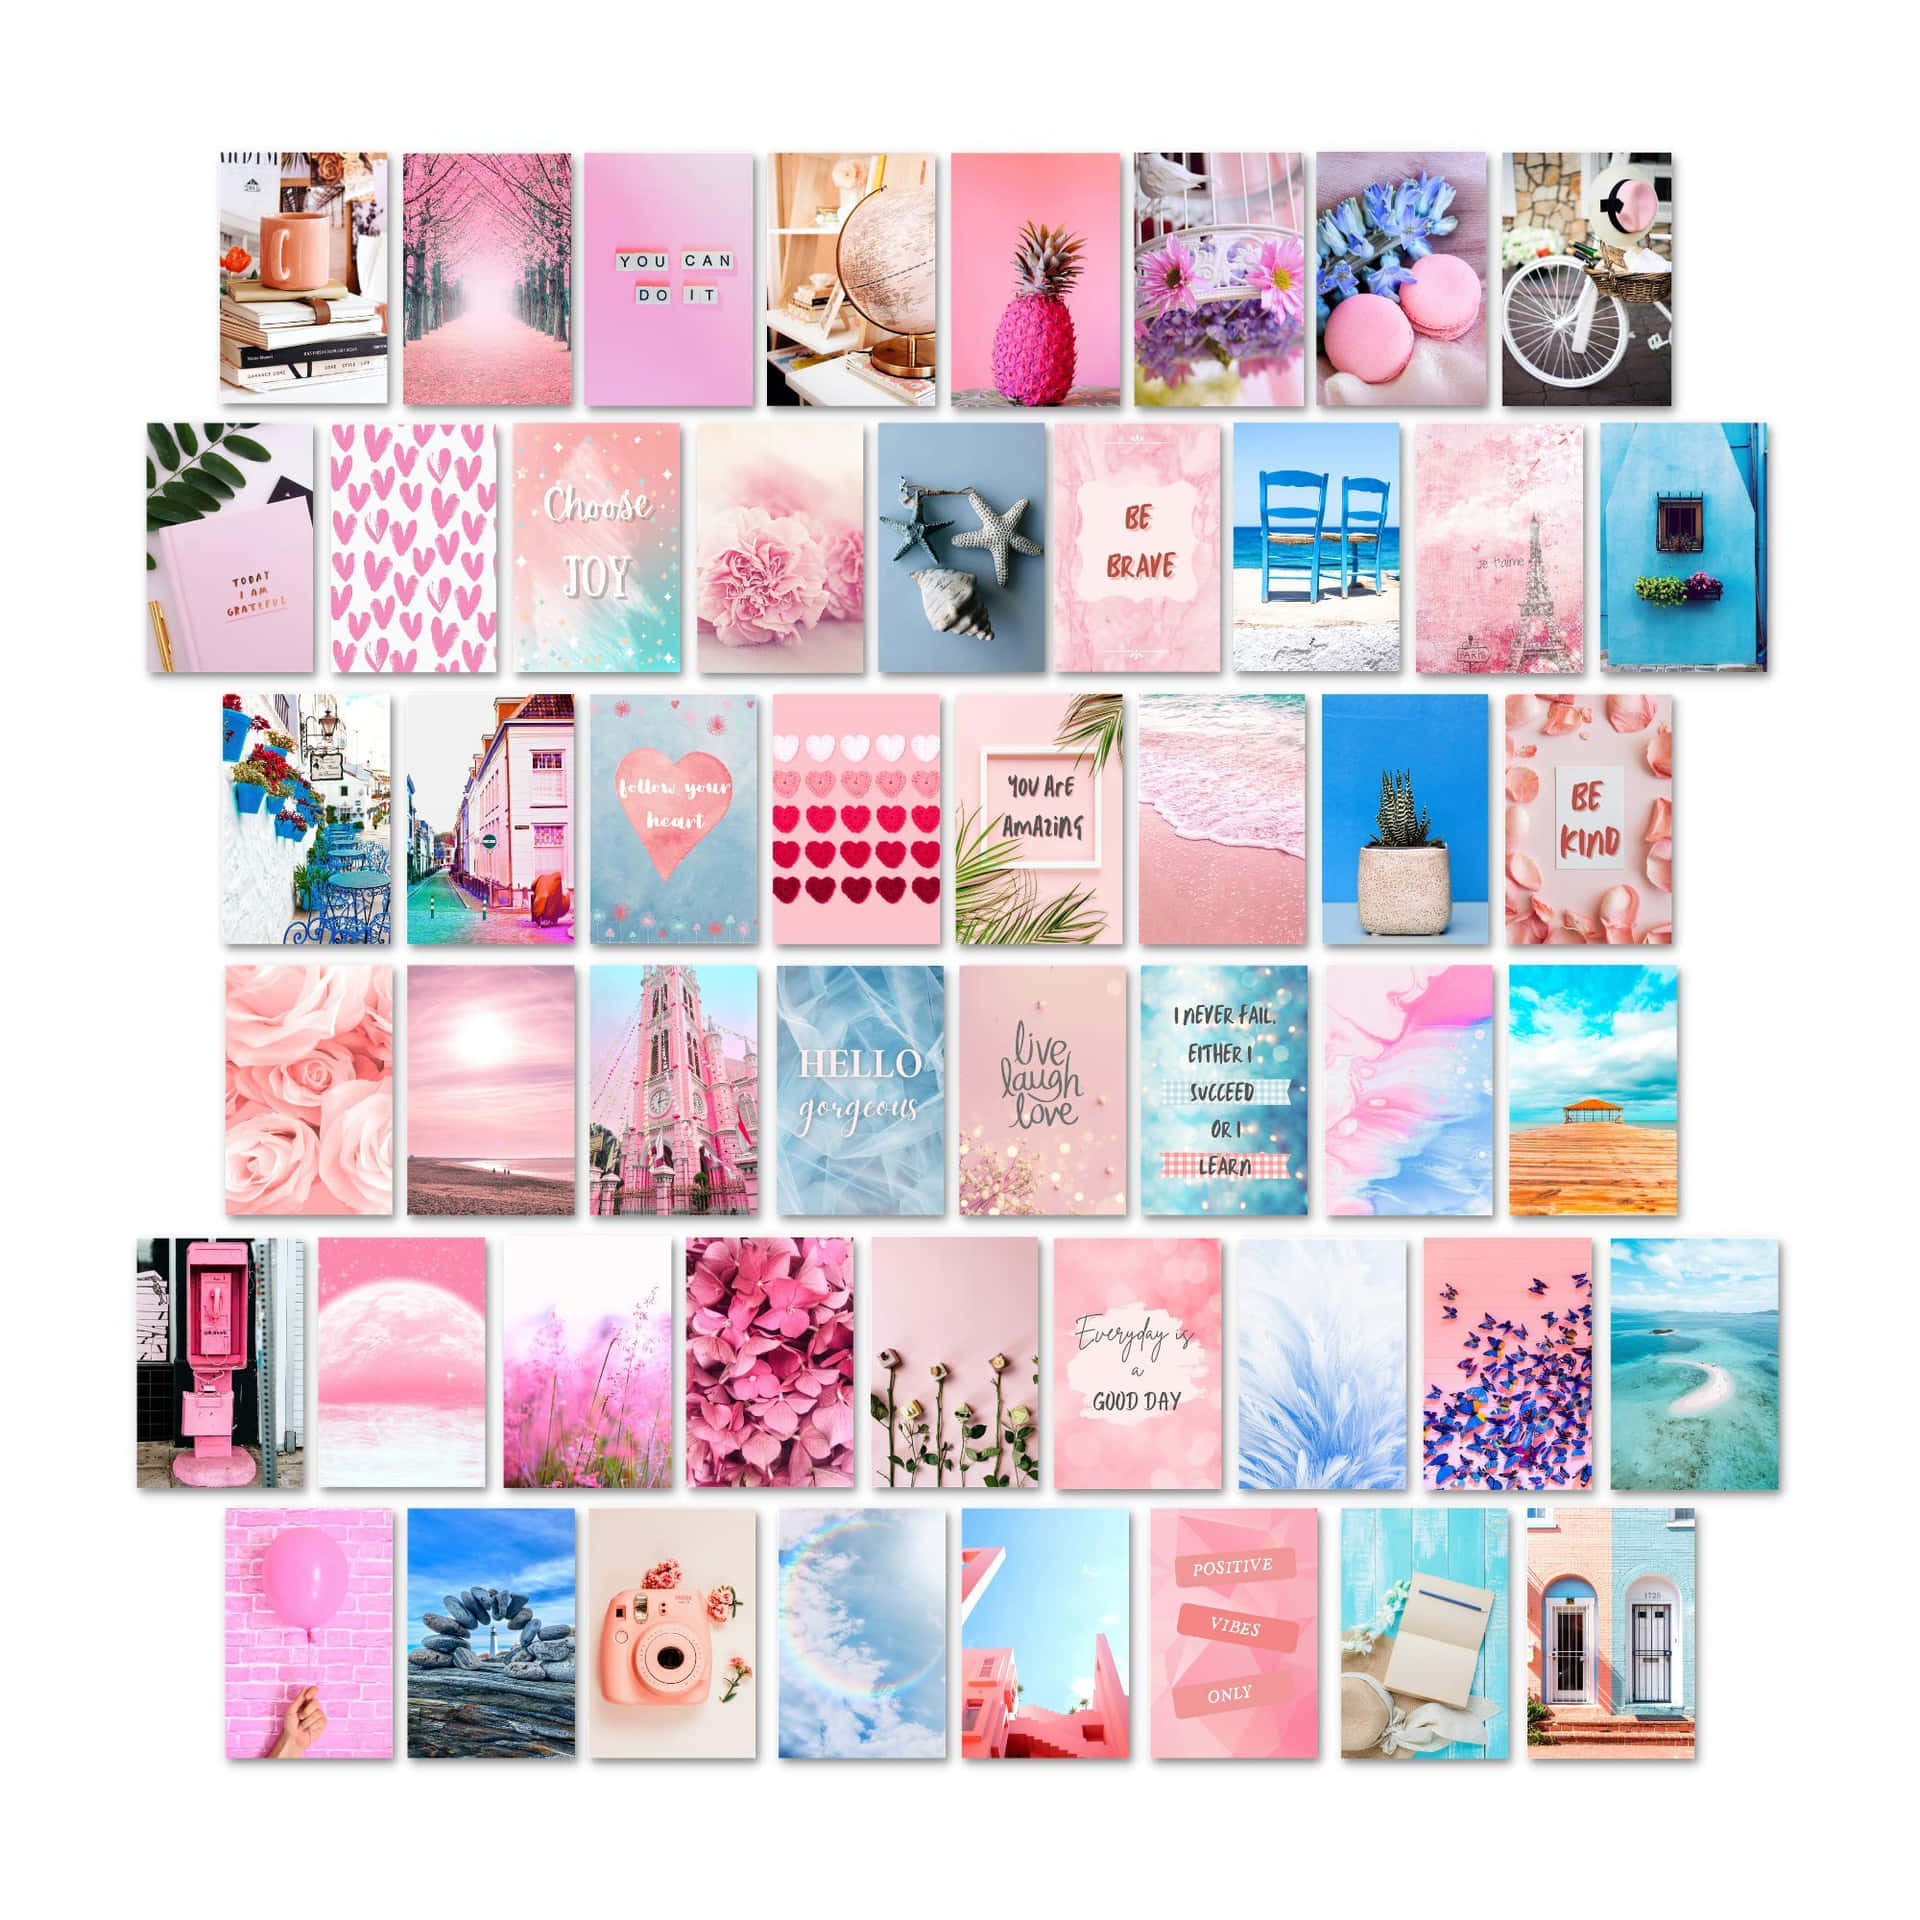 Keep Up With The Seasons Trends With Stylish And Cute Products! Background